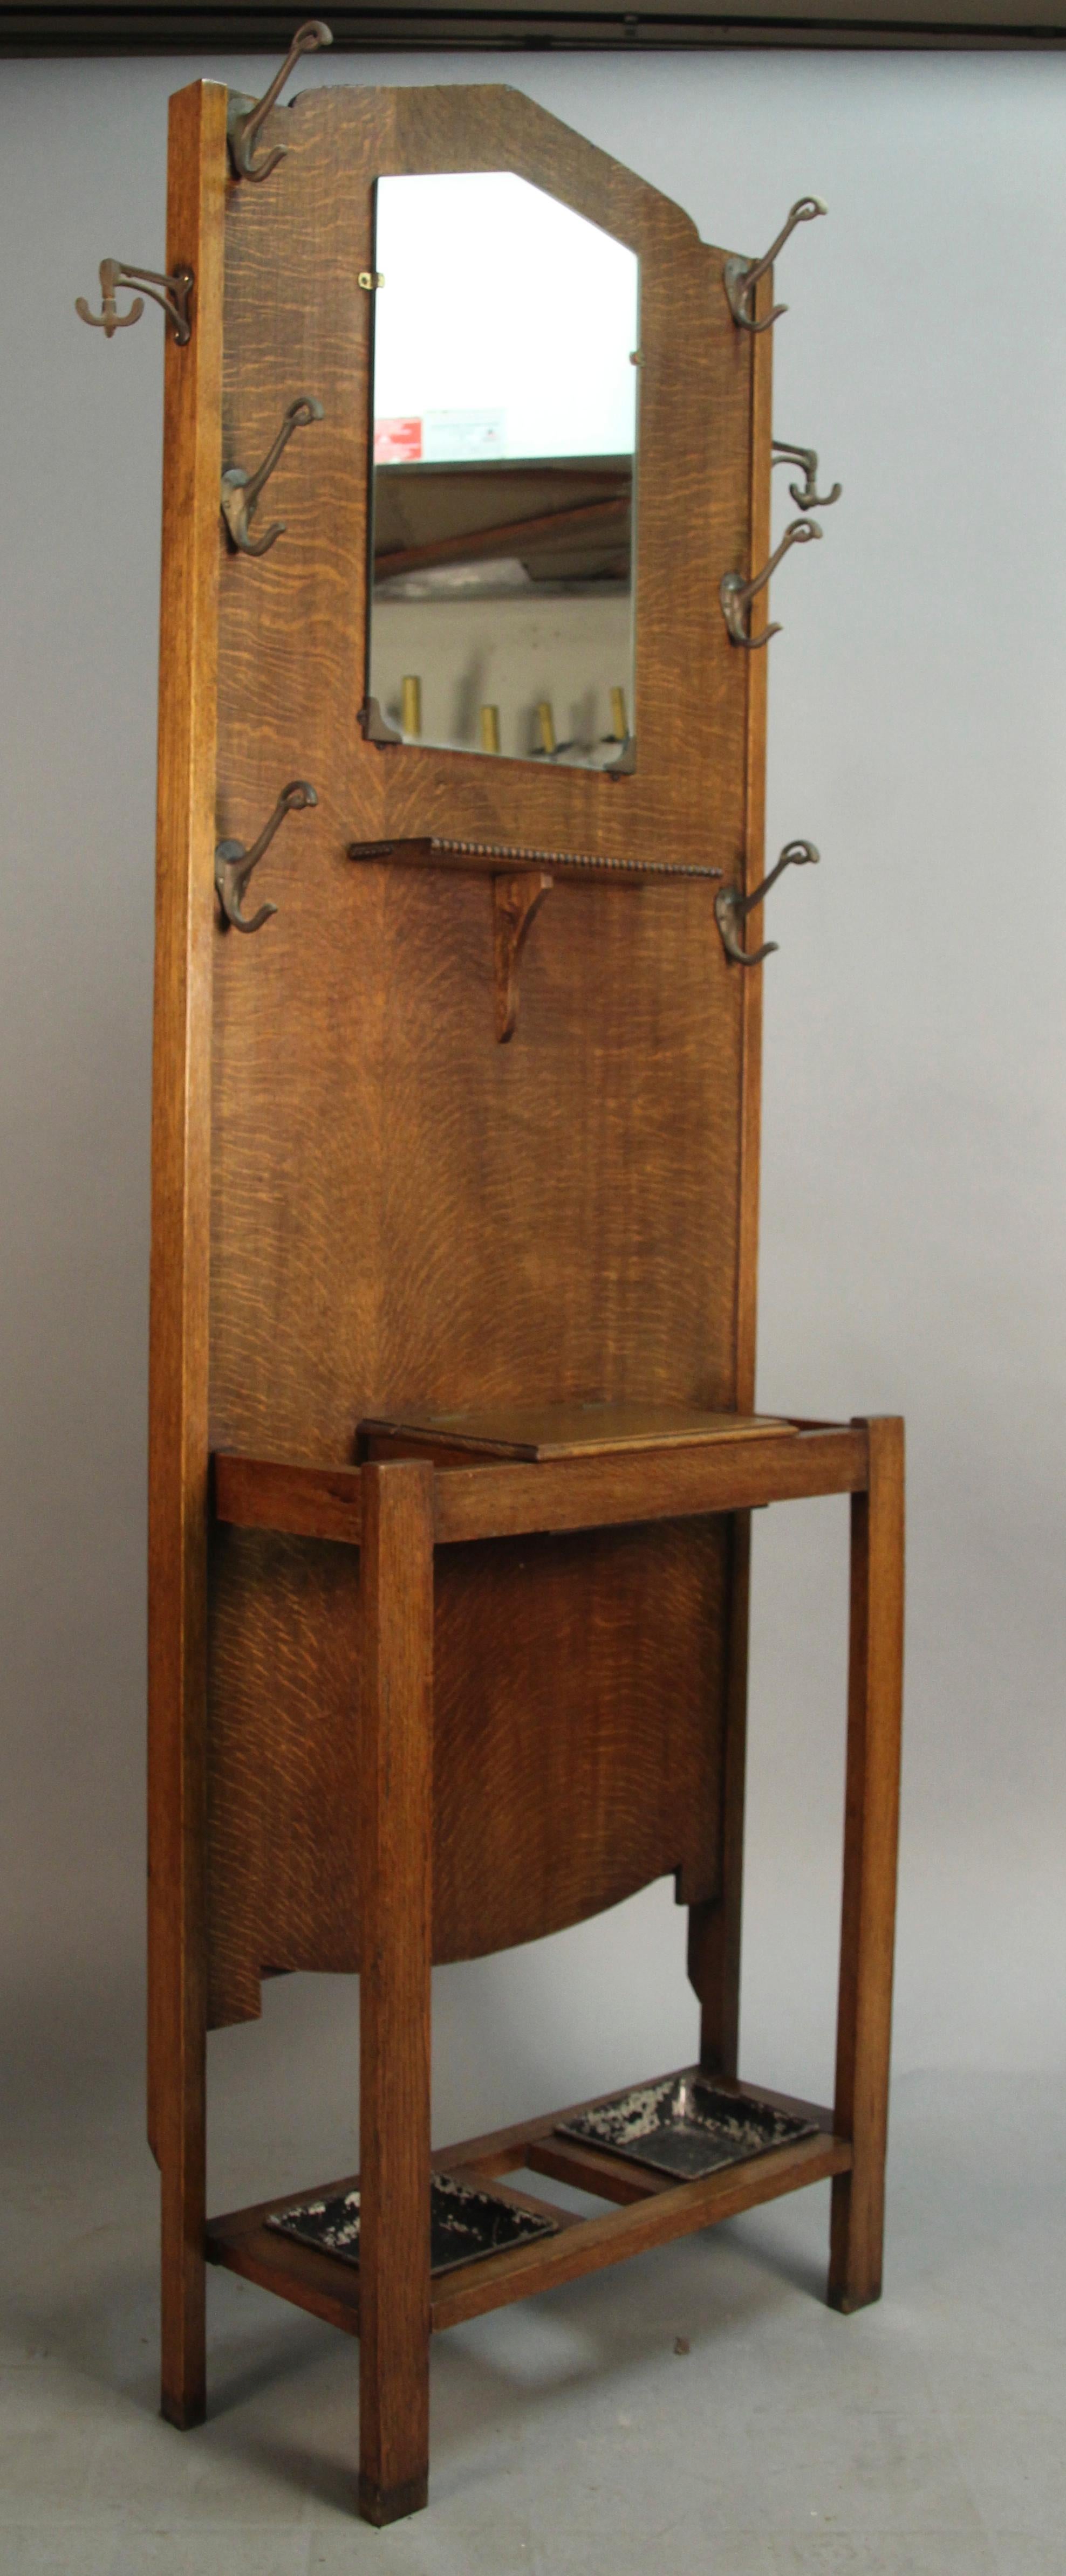 Hall tree with several hooks, umbrella stand, shelf with storage and mirror, circa 1910.